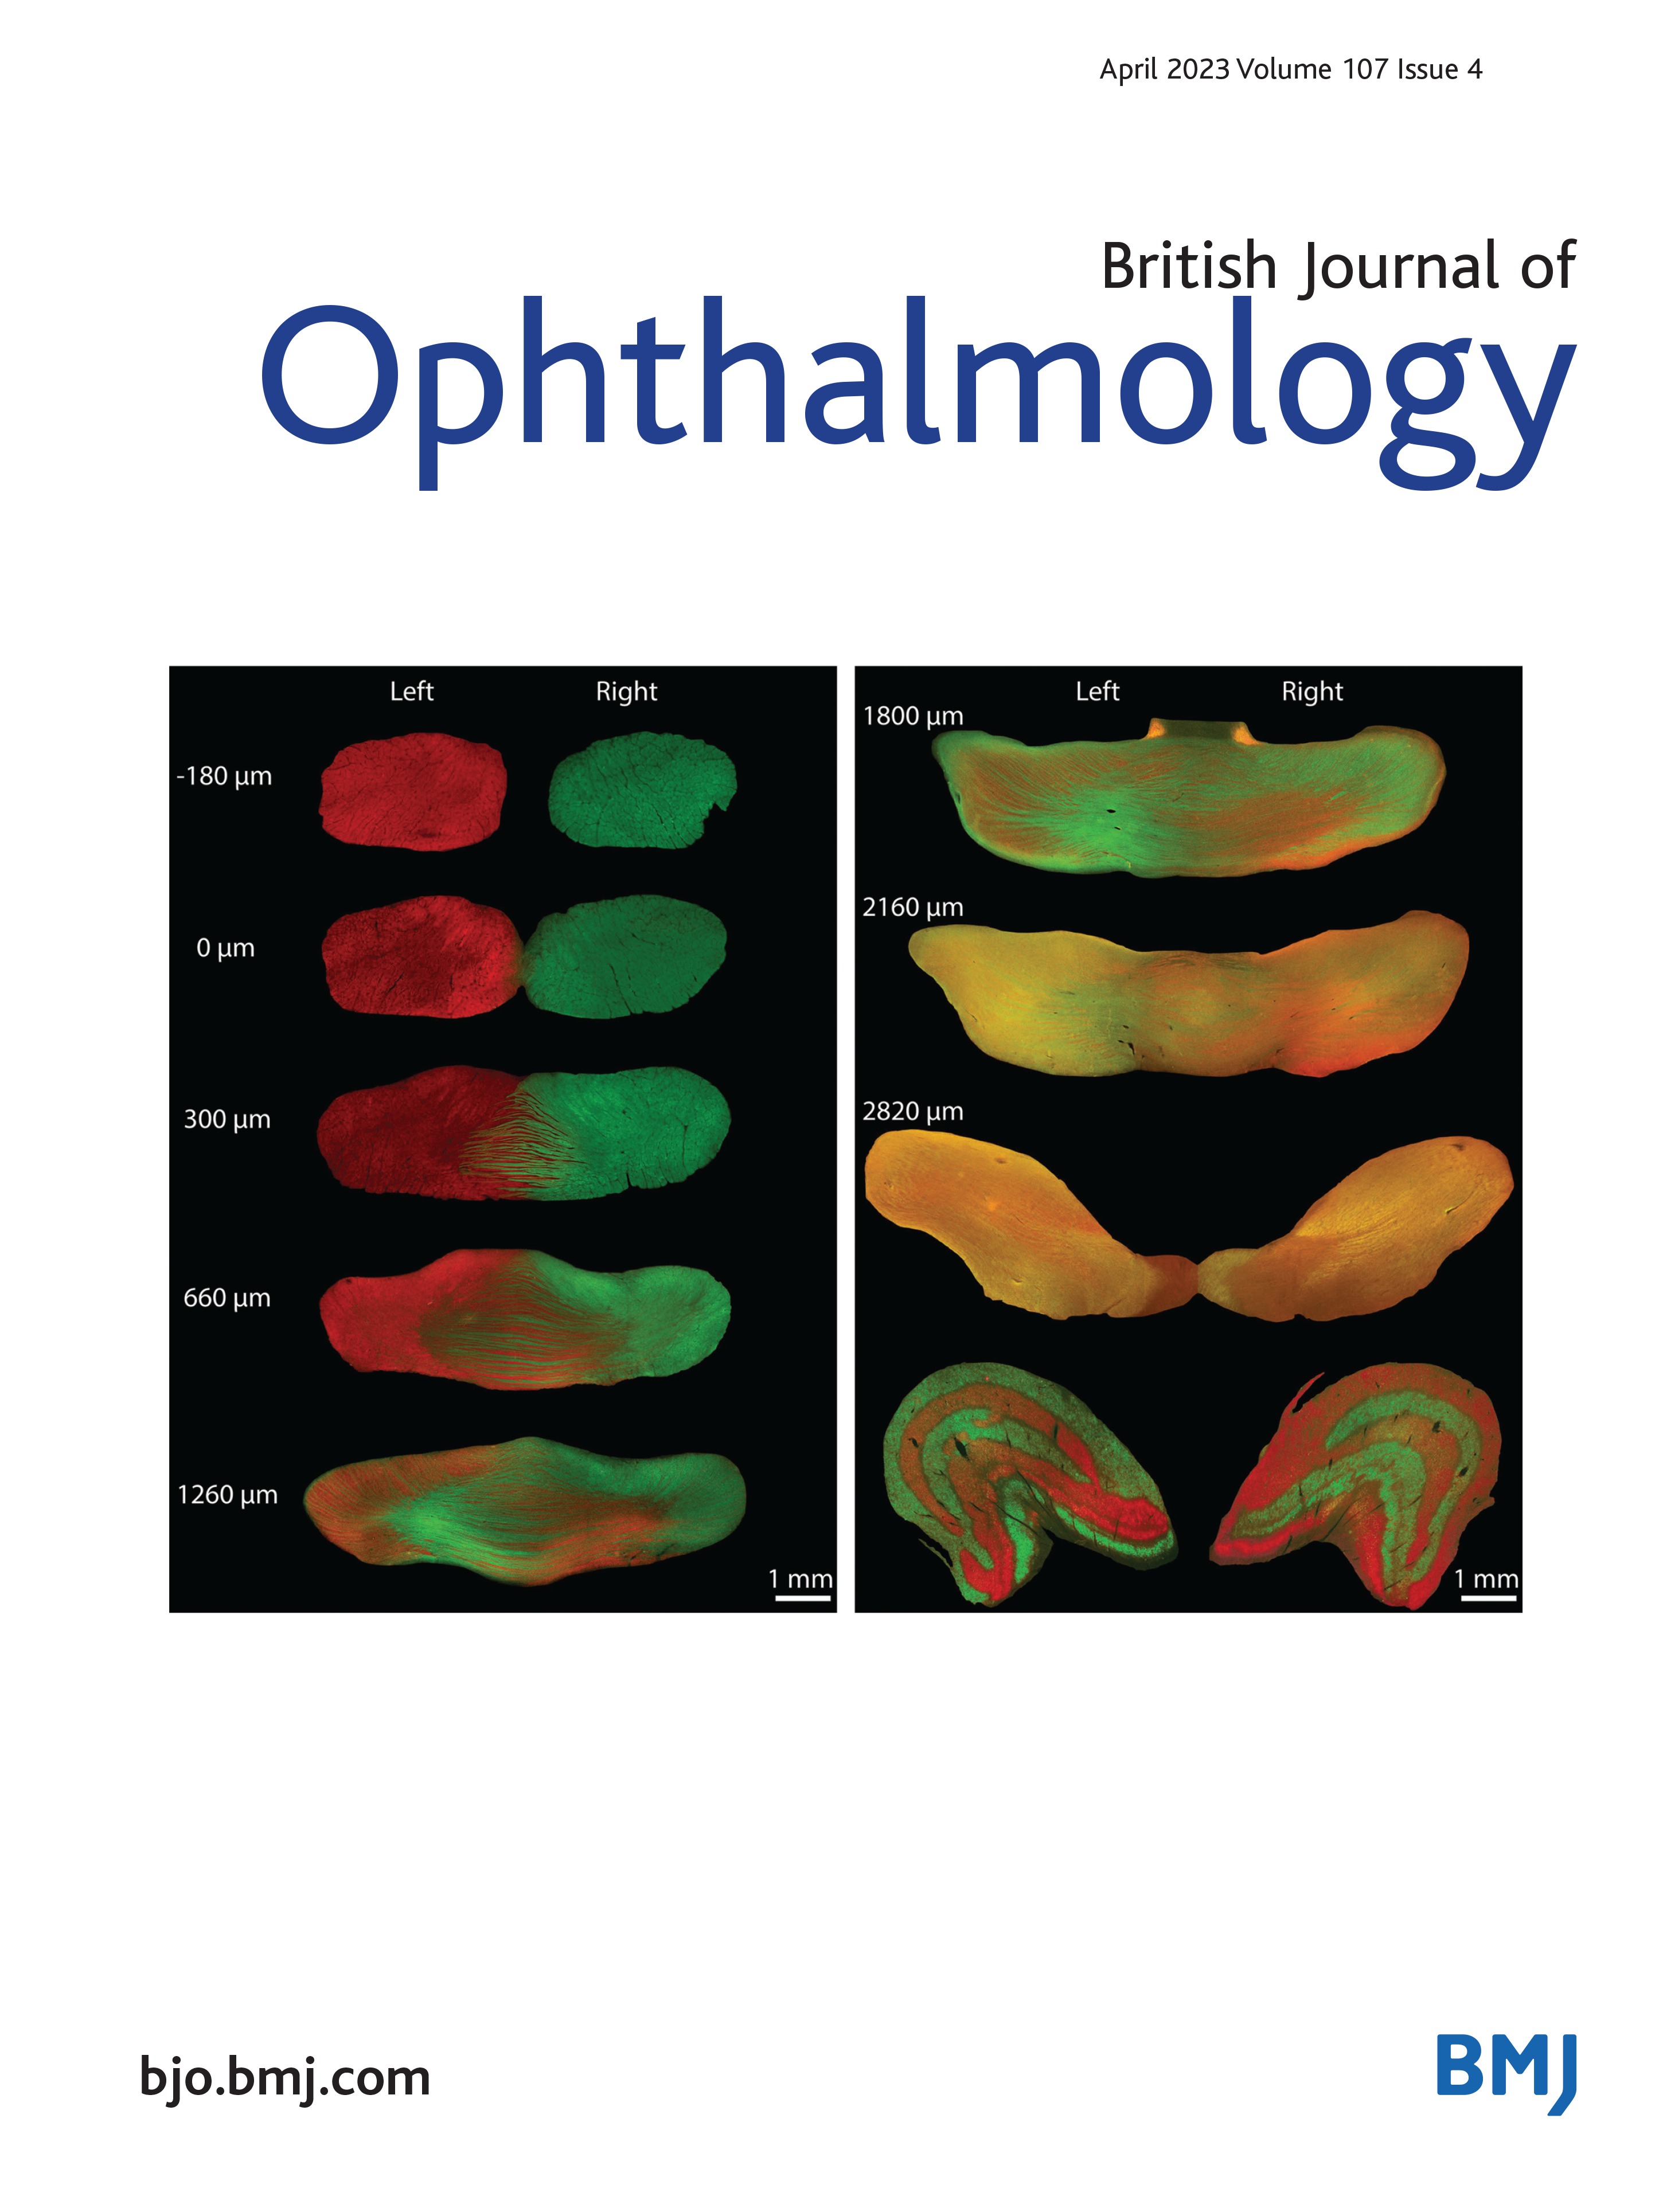 Population-based study on the prevalence, clinical characteristics and vision-related quality of life in patients with corneal opacity resulting from infectious keratitis: results from the Corneal Opacity Rural Epidemiological study